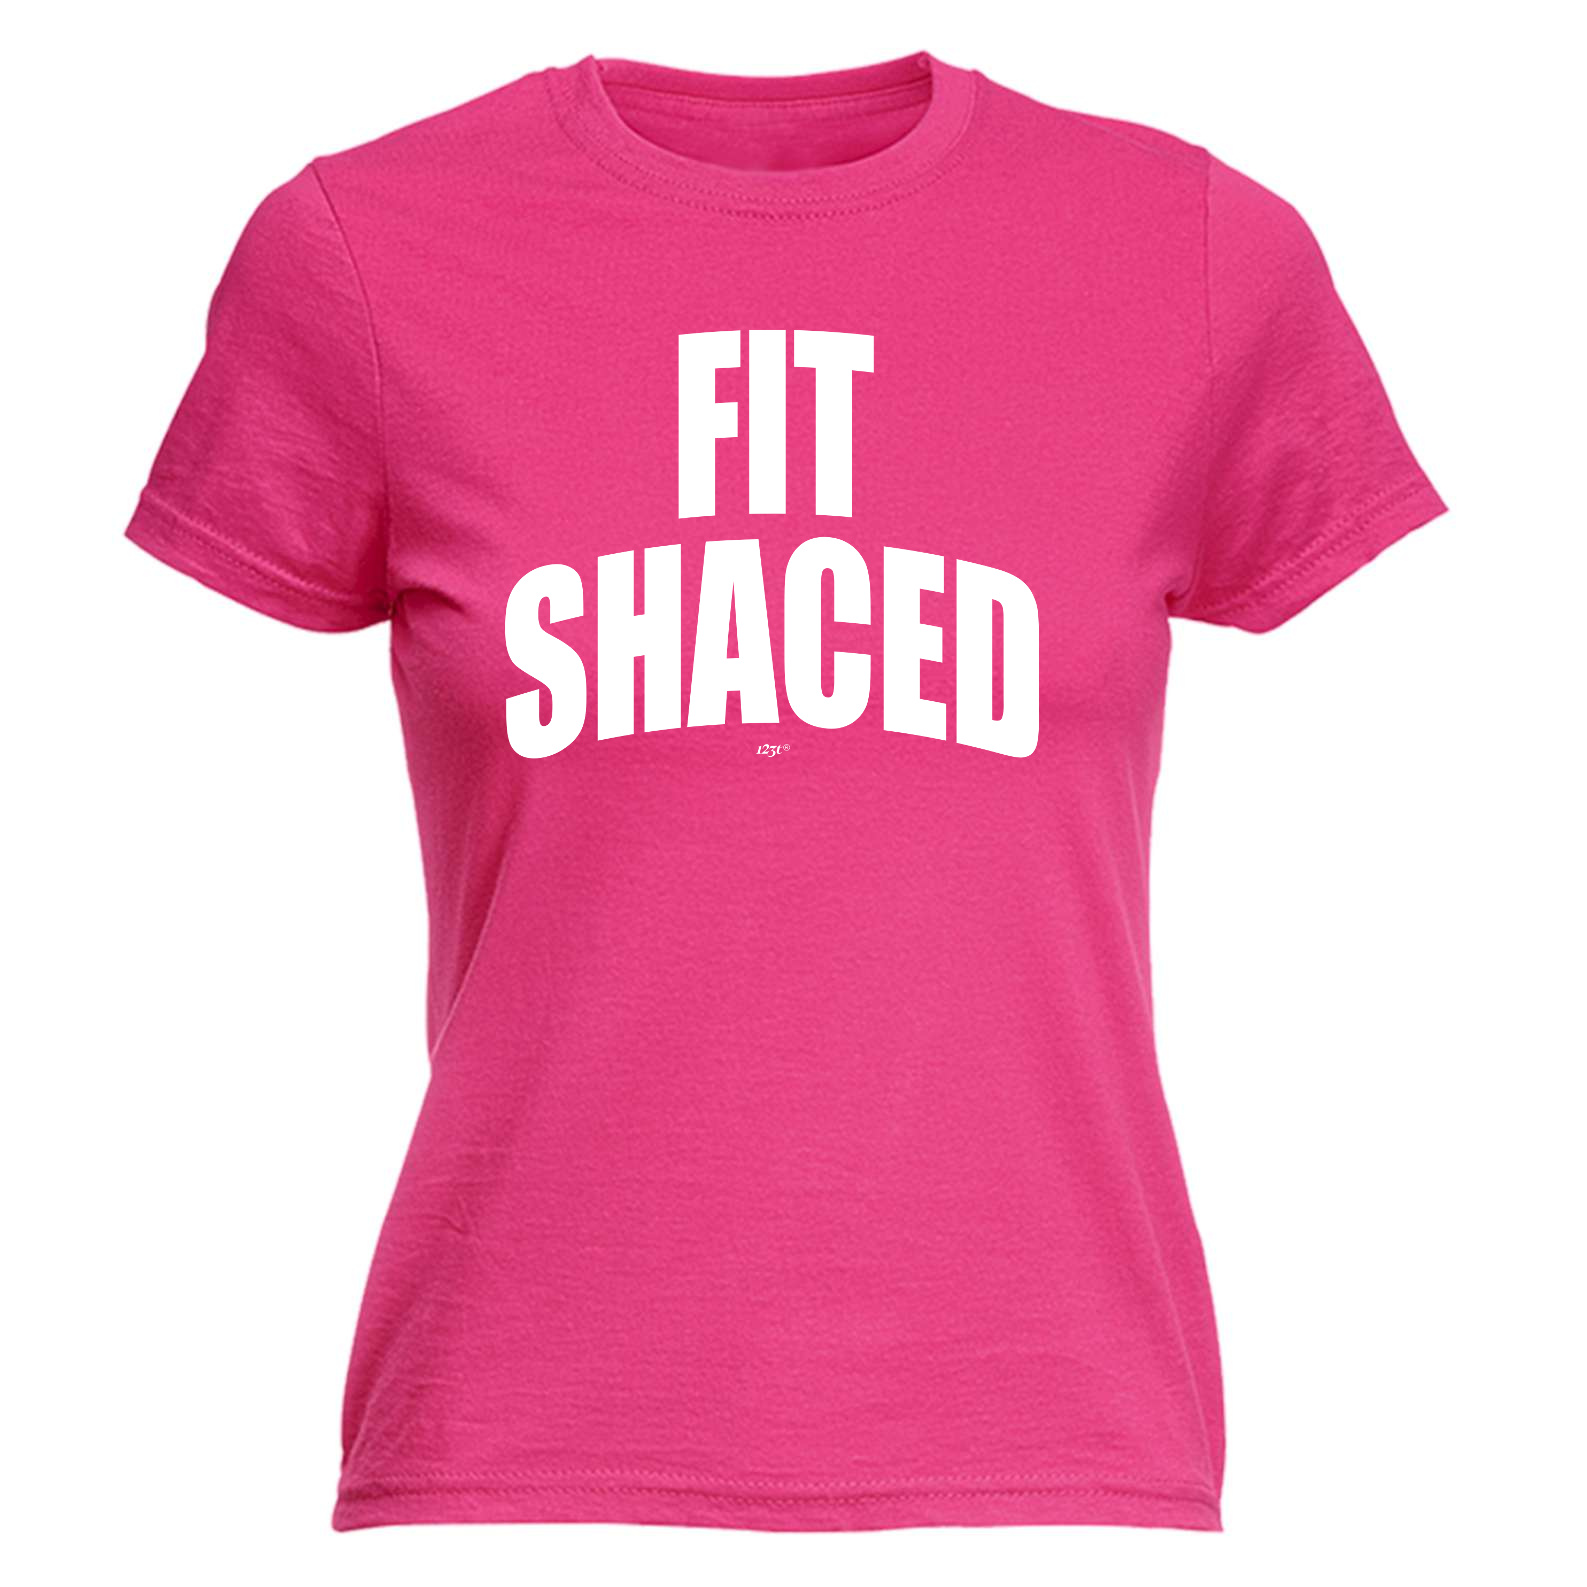 Fit Shaced Funny Novelty Tops T-Shirt Womens tee TShirt 